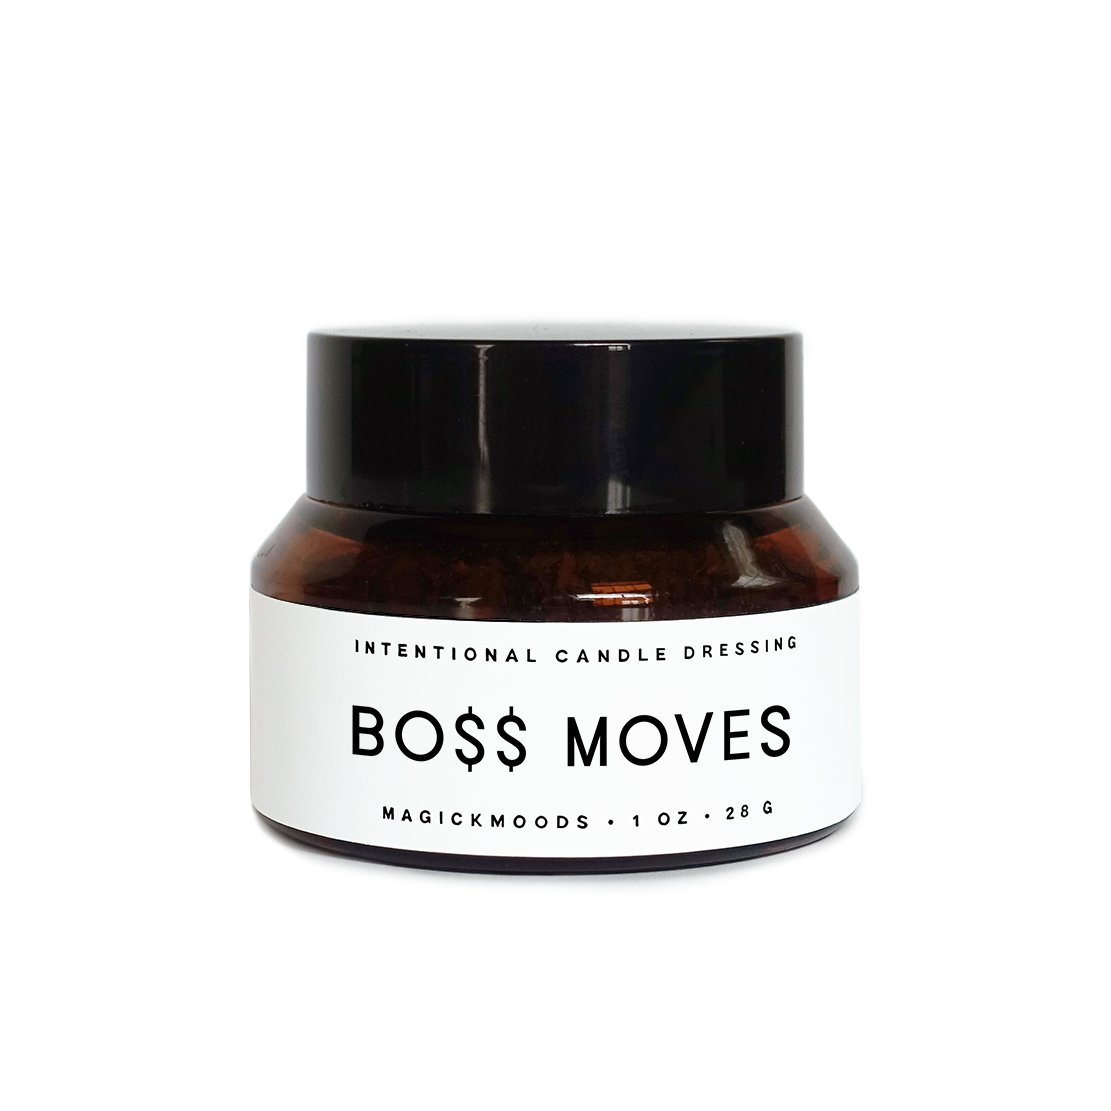 Boss Moves Candle Dressing